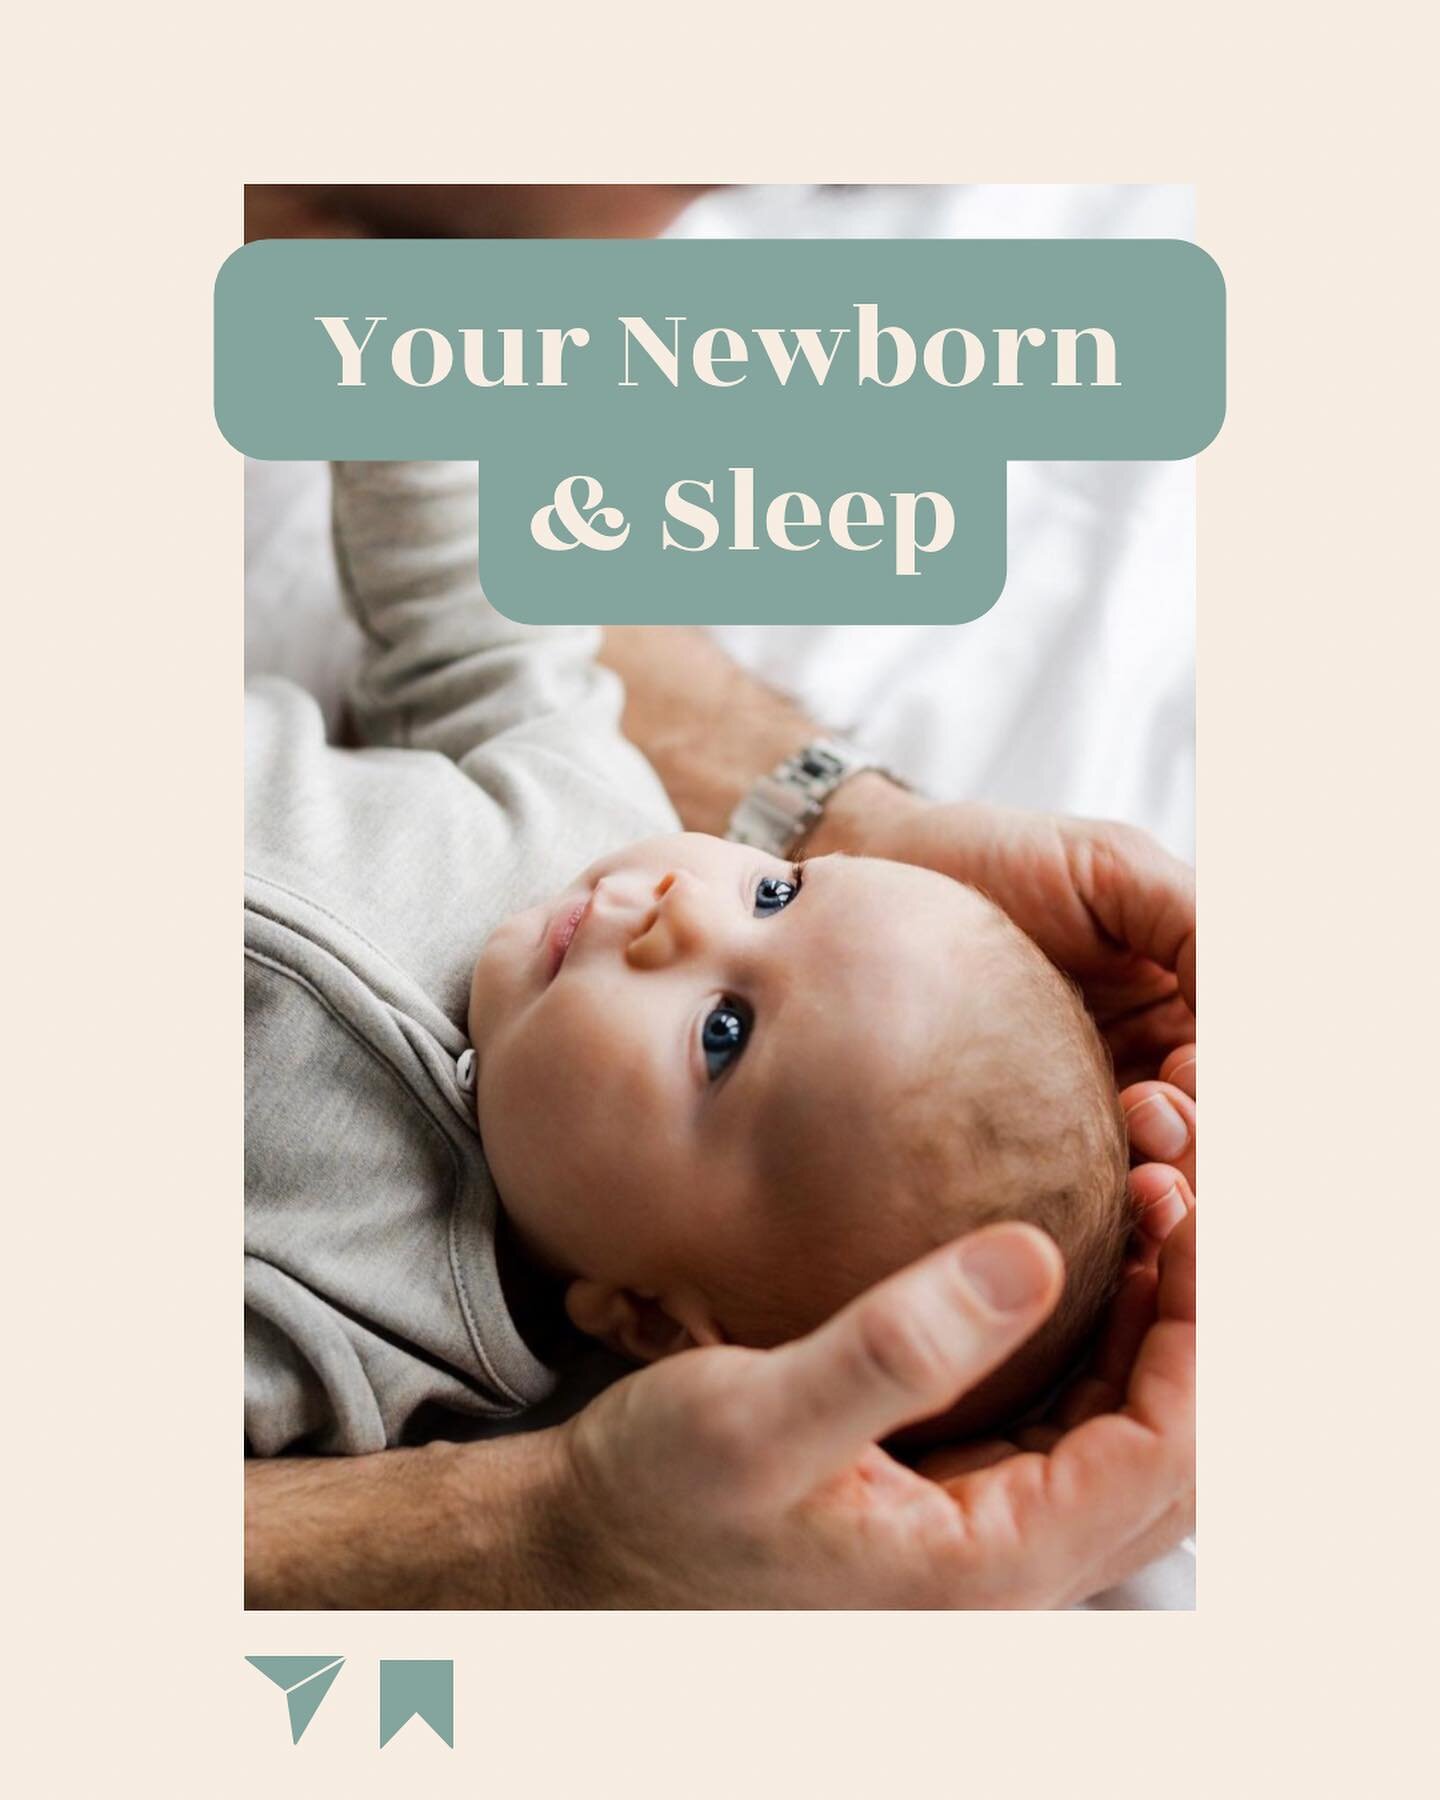 💌 Know somebody expecting a baby, or with a newborn? Share this with them!

There is so much I could say on newborn baby sleep.. But here are a few golden nuggets of guidance to get you started.

Most of all, trust your instincts &amp; go easy on yo